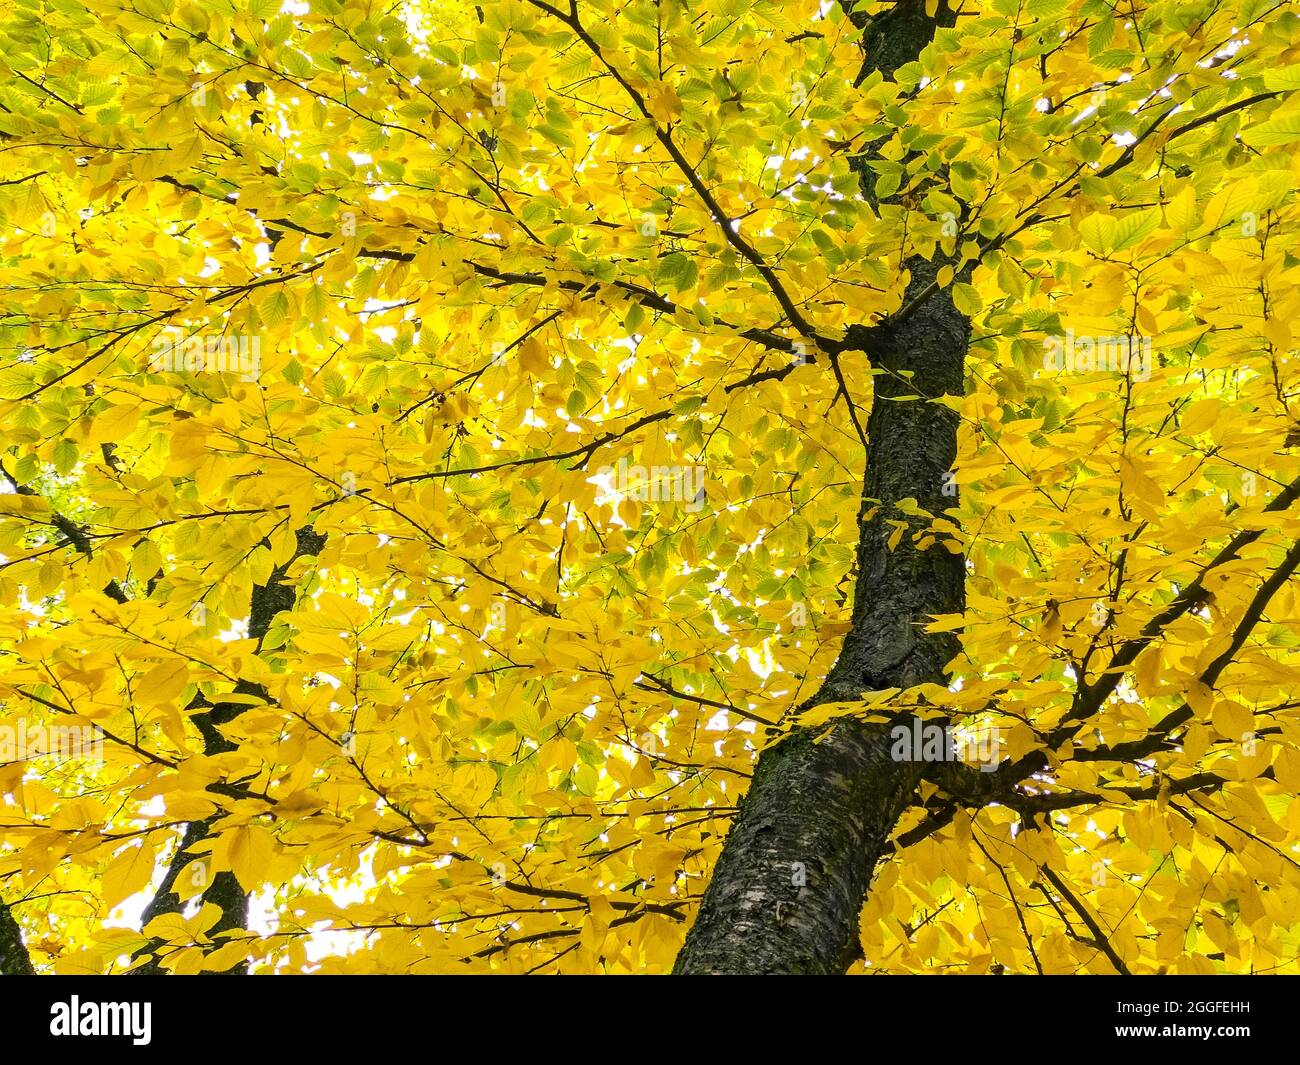 bright yellow lush foliage of beech tree in autumn forest. view from below upwards. Stock Photo